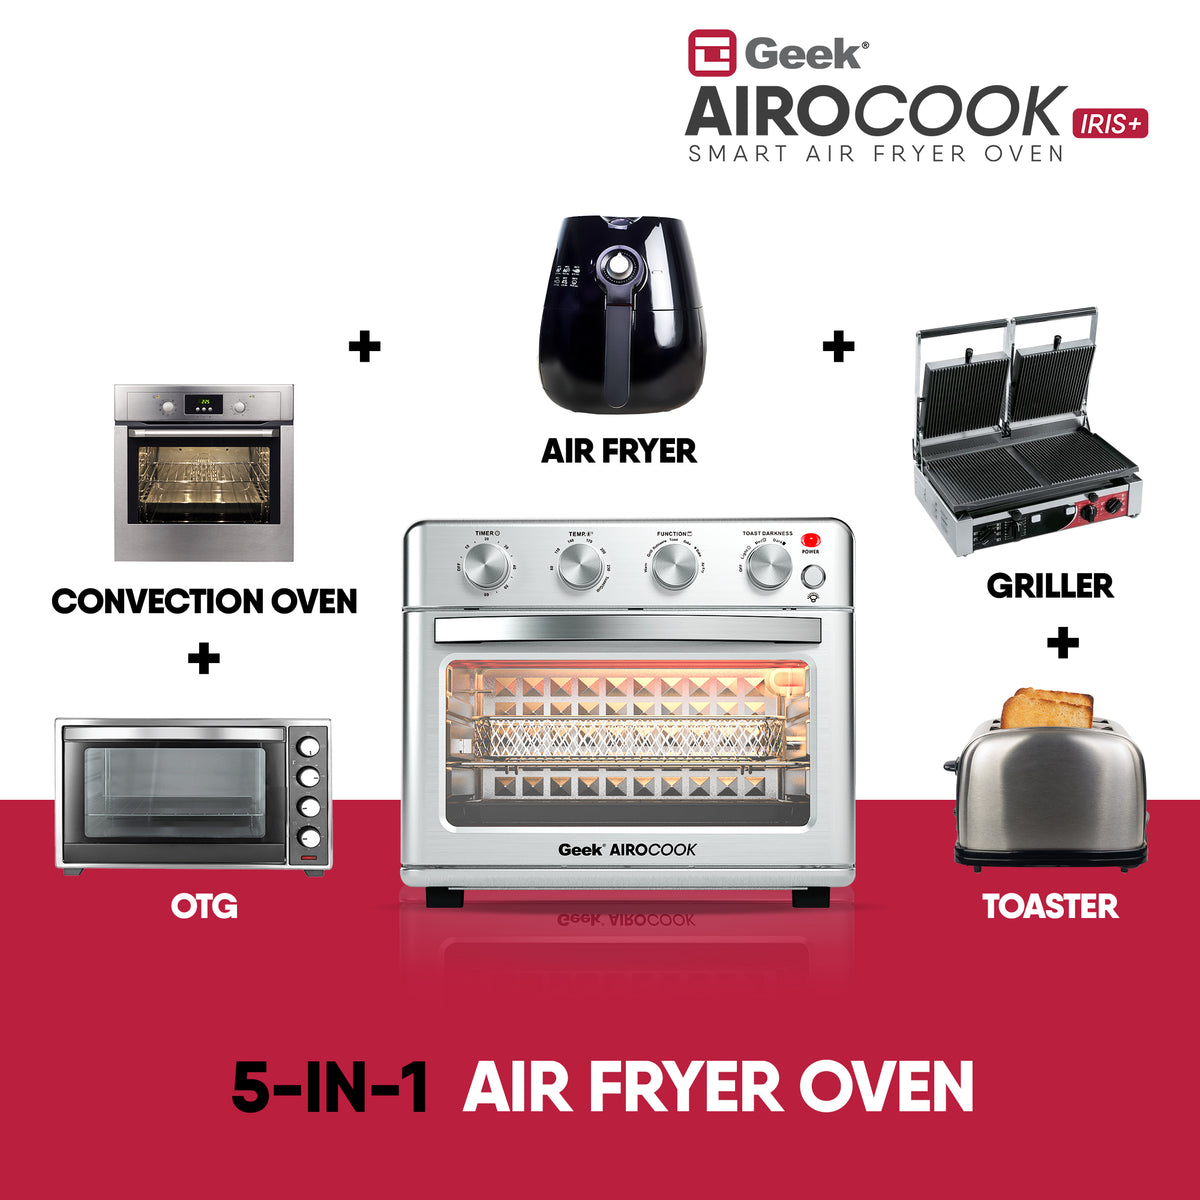 Geek AiroCook Digix 30L - All in One Air Fryer Oven with Dehydrating  Functions